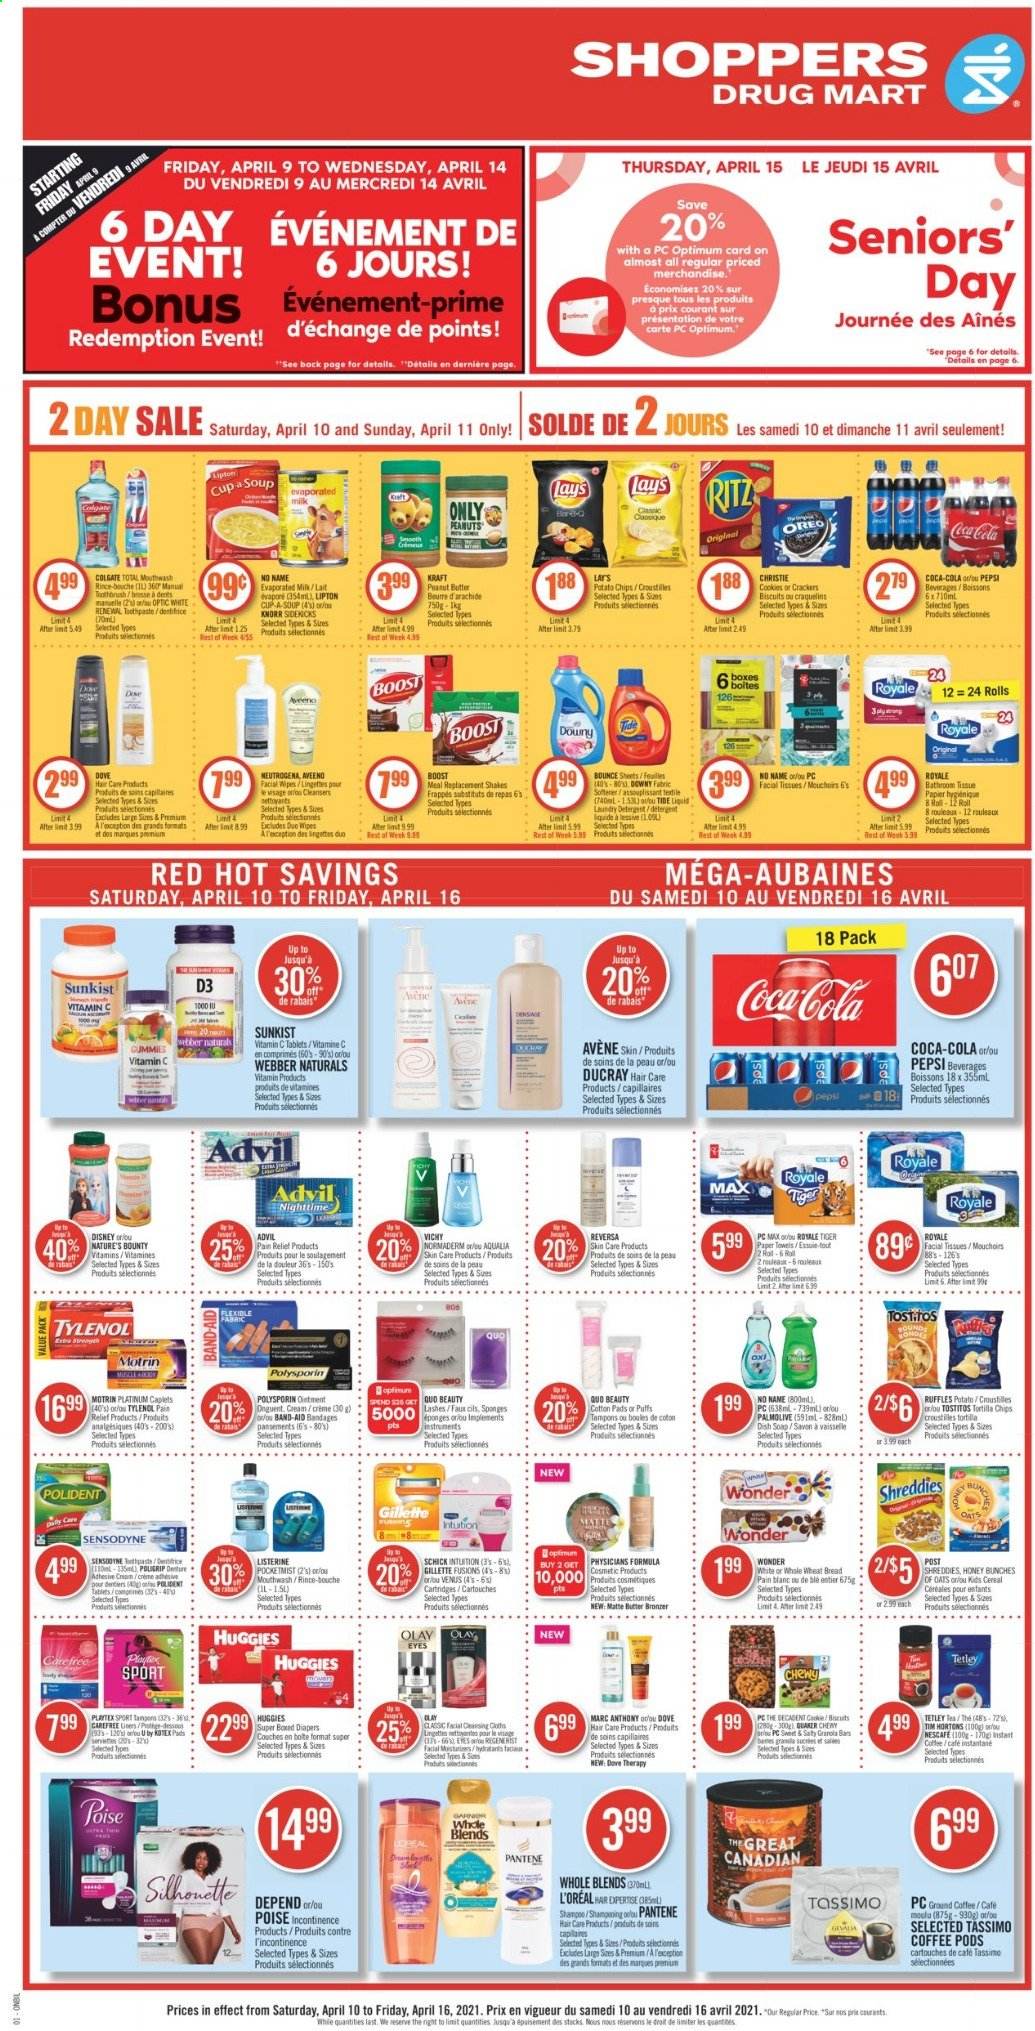 thumbnail - Shoppers Drug Mart Flyer - April 10, 2021 - April 16, 2021 - Sales products - cookies, crackers, biscuit, RITZ, tortilla chips, potato chips, Lay’s, Ruffles, Tostitos, soup, cereals, puffs, Quaker, Kraft®, peanut butter, peanuts, Coca-Cola, Pepsi, Boost, tea, coffee pods, ground coffee, wipes, nappies, Aveeno, Disney, ointment, bath tissue, kitchen towels, paper towels, Tide, fabric softener, laundry detergent, Bounce, Downy Laundry, Vichy, Palmolive, toothbrush, mouthwash, Polident, Playtex, Carefree, Kotex, Kotex pads, tampons, facial tissues, L’Oréal, Olay, Schick, Venus, bronzing powder, pain relief, Nature's Bounty, Tylenol, vitamin c, Advil Rapid, vitamin D3, Motrin, Oreo, Knorr, Gillette, granola, Listerine, Neutrogena, Huggies, Pantene, chips, Sensodyne, Nescafé. Page 1.